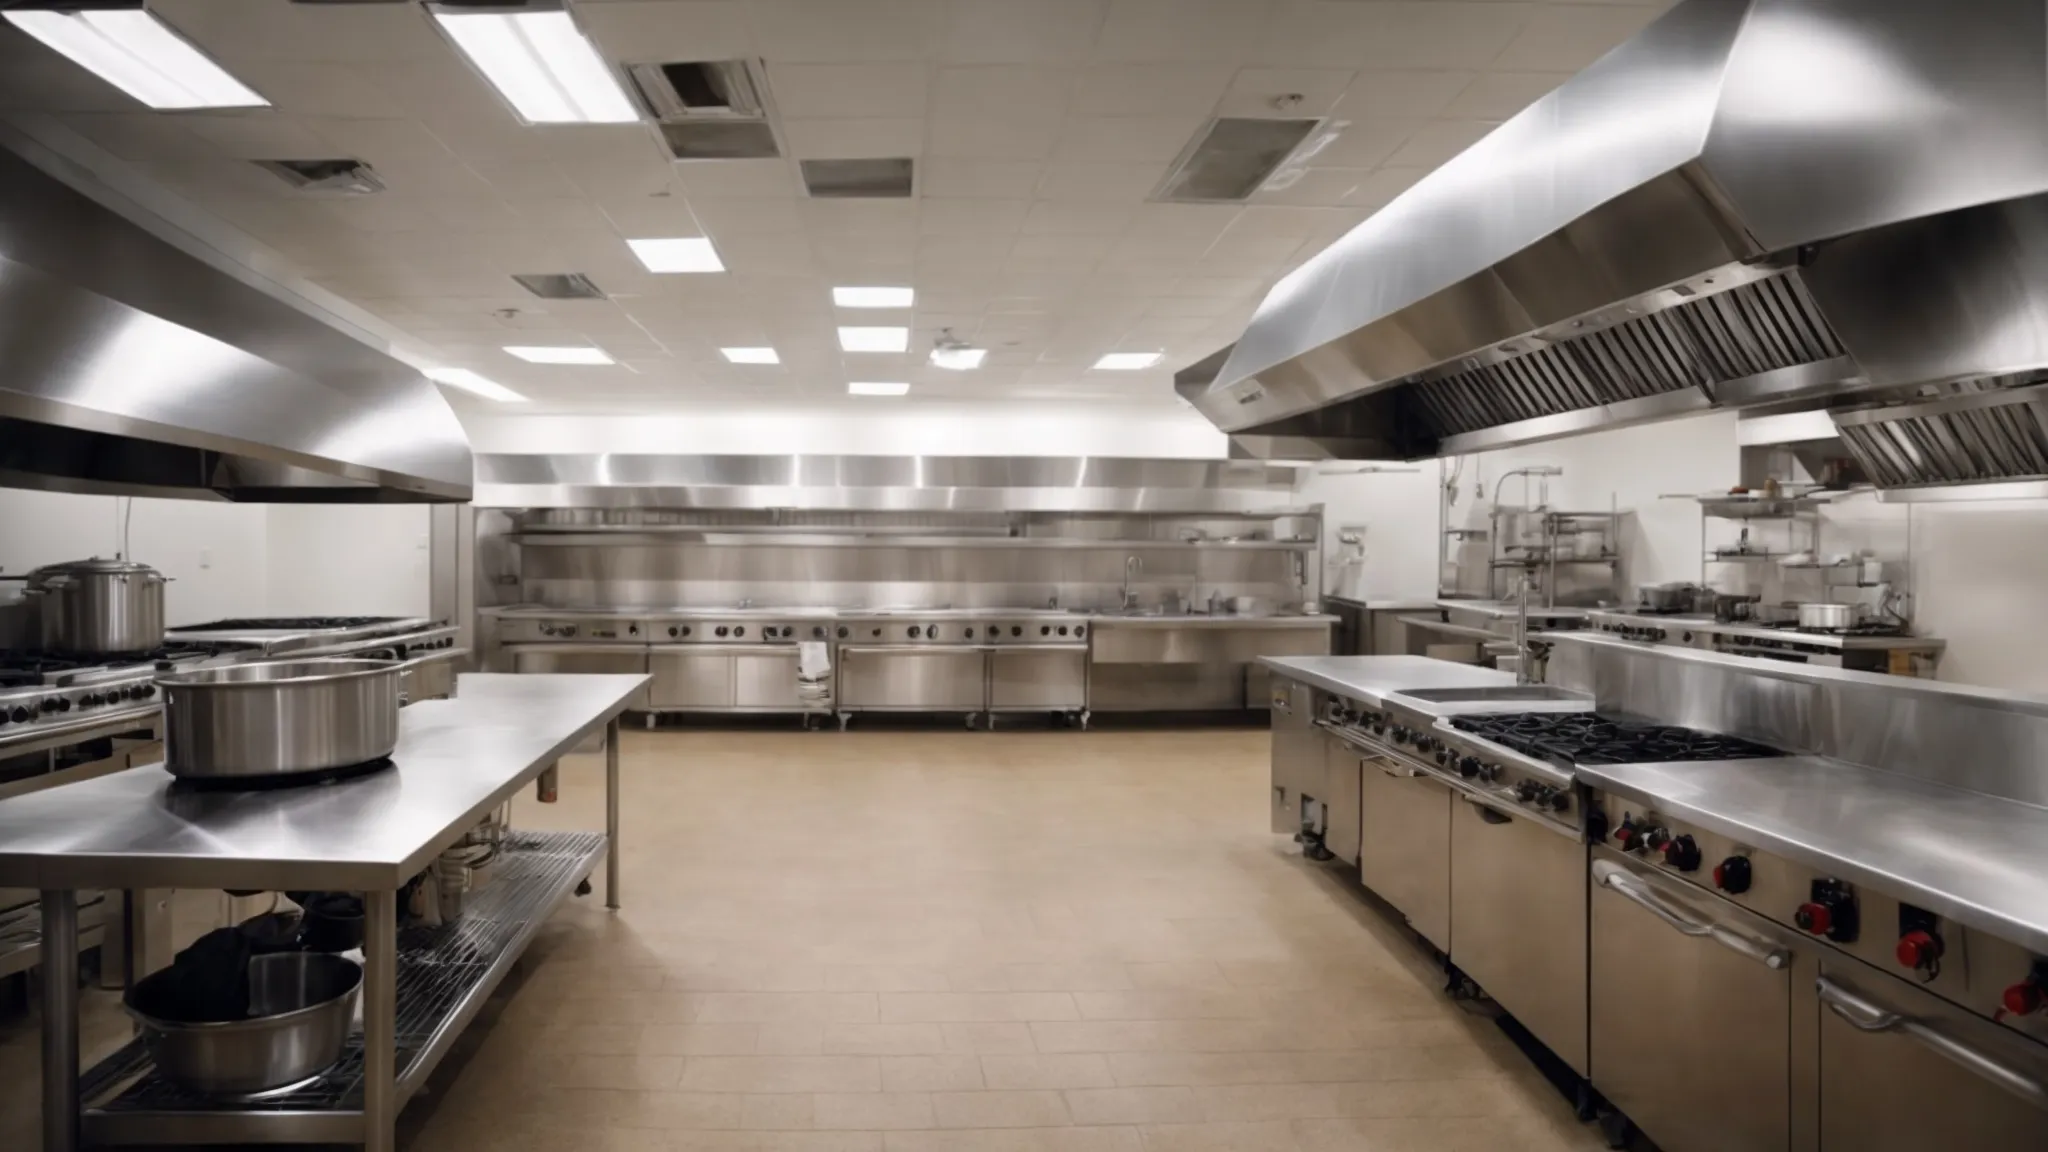 a wide-angle view of a clean, spacious commercial kitchen, with stainless steel appliances and a large hood vent gleaming under bright lights.